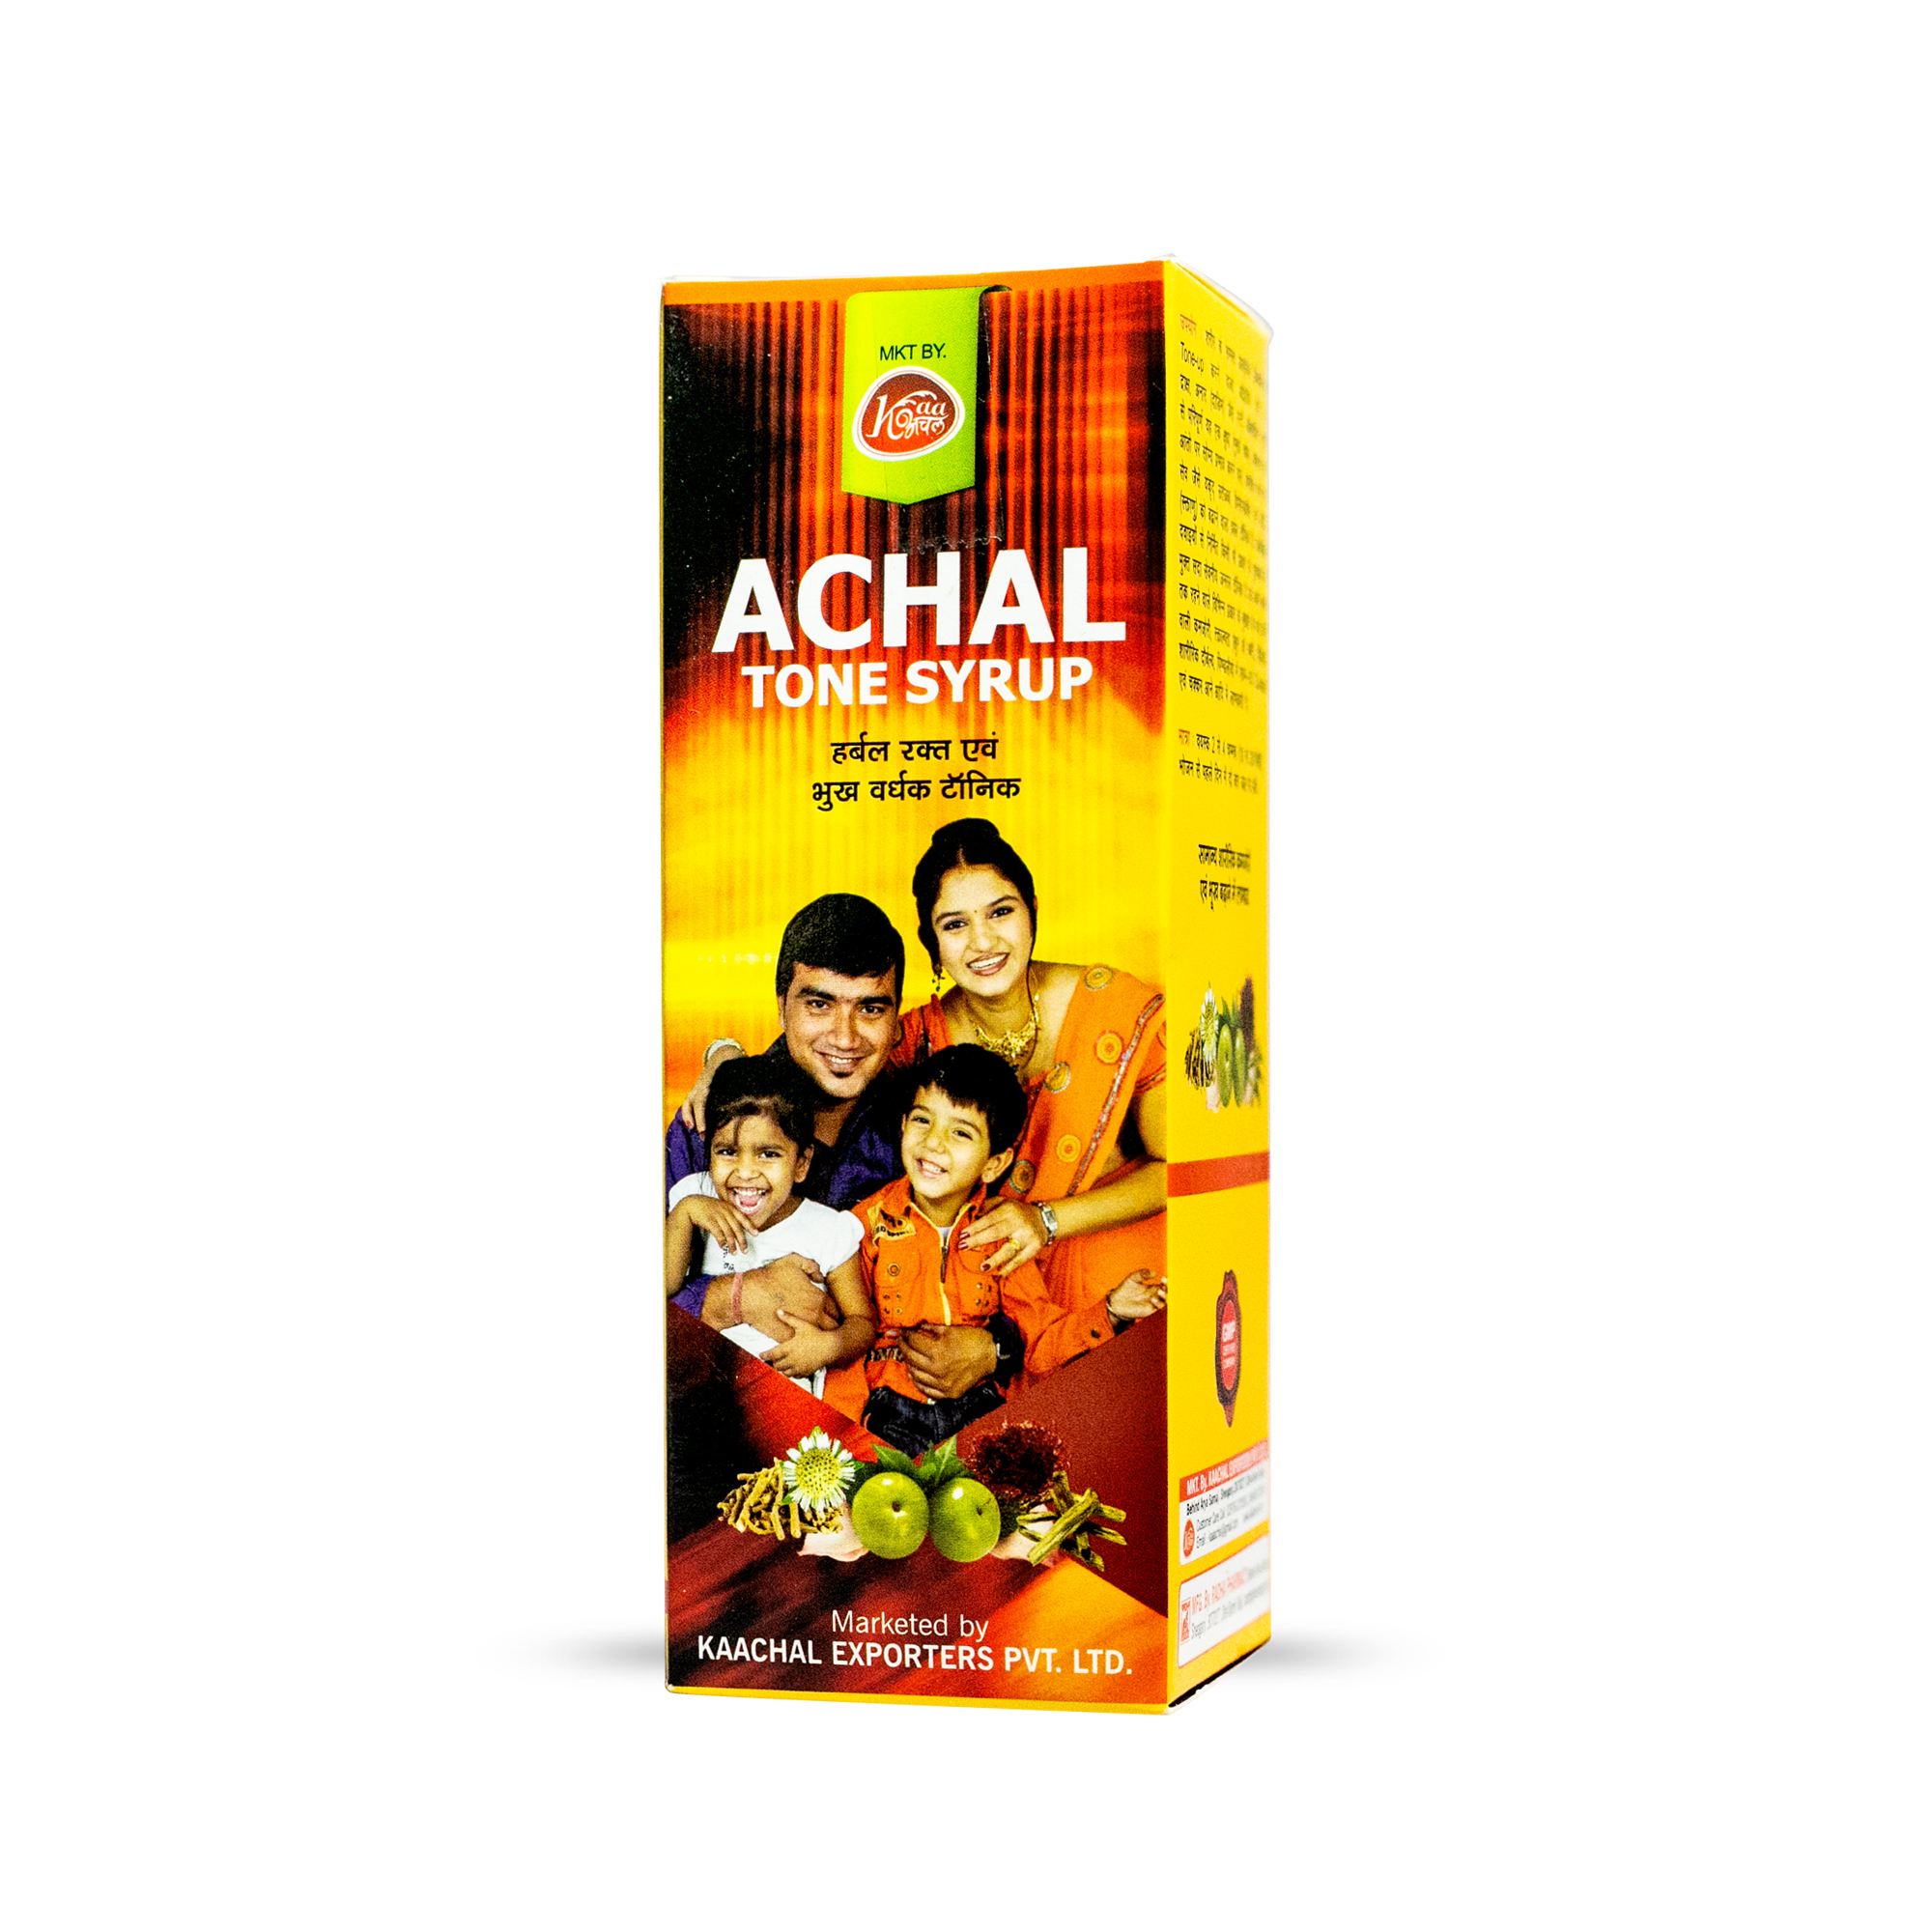 Achal Tone Syrup